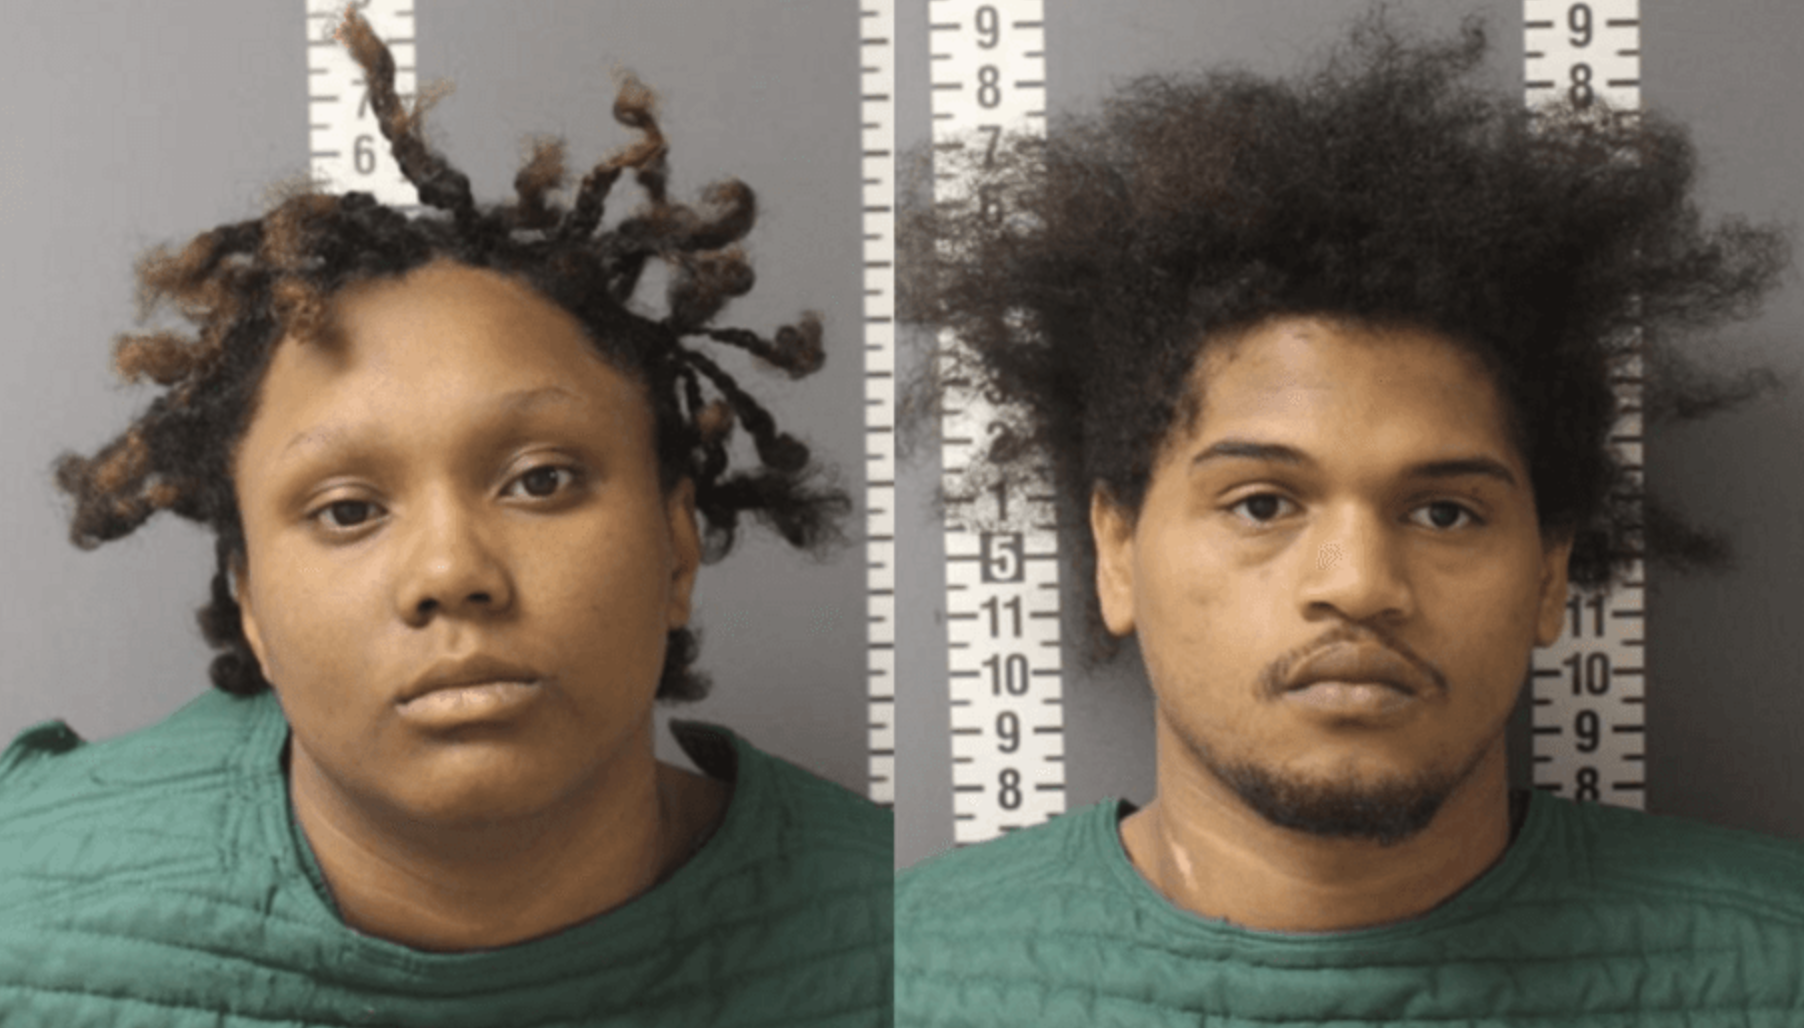 Teen squatters apprehended following discovery of deceased woman in duffle bag